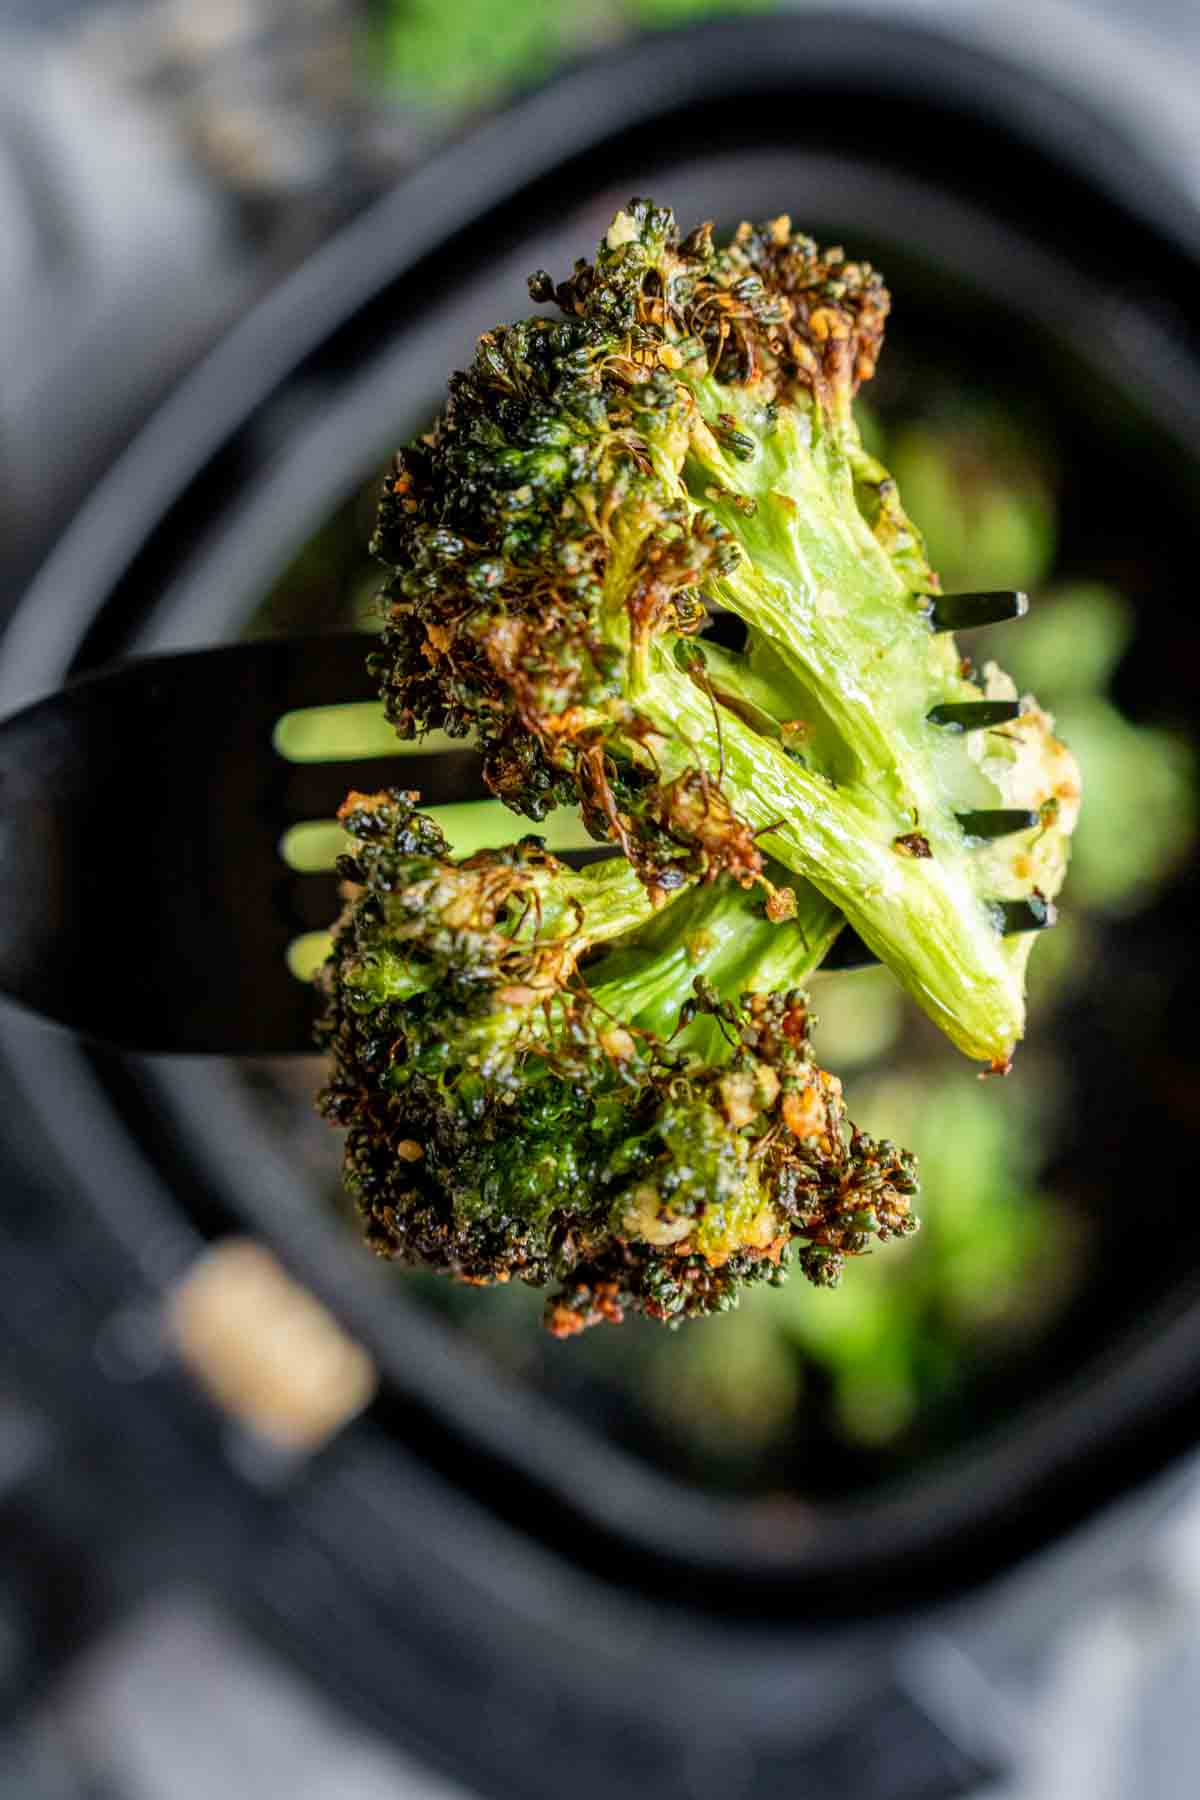 Air Fryer Broccoli floret held by tongs with charred edges, suggesting a crispy texture.